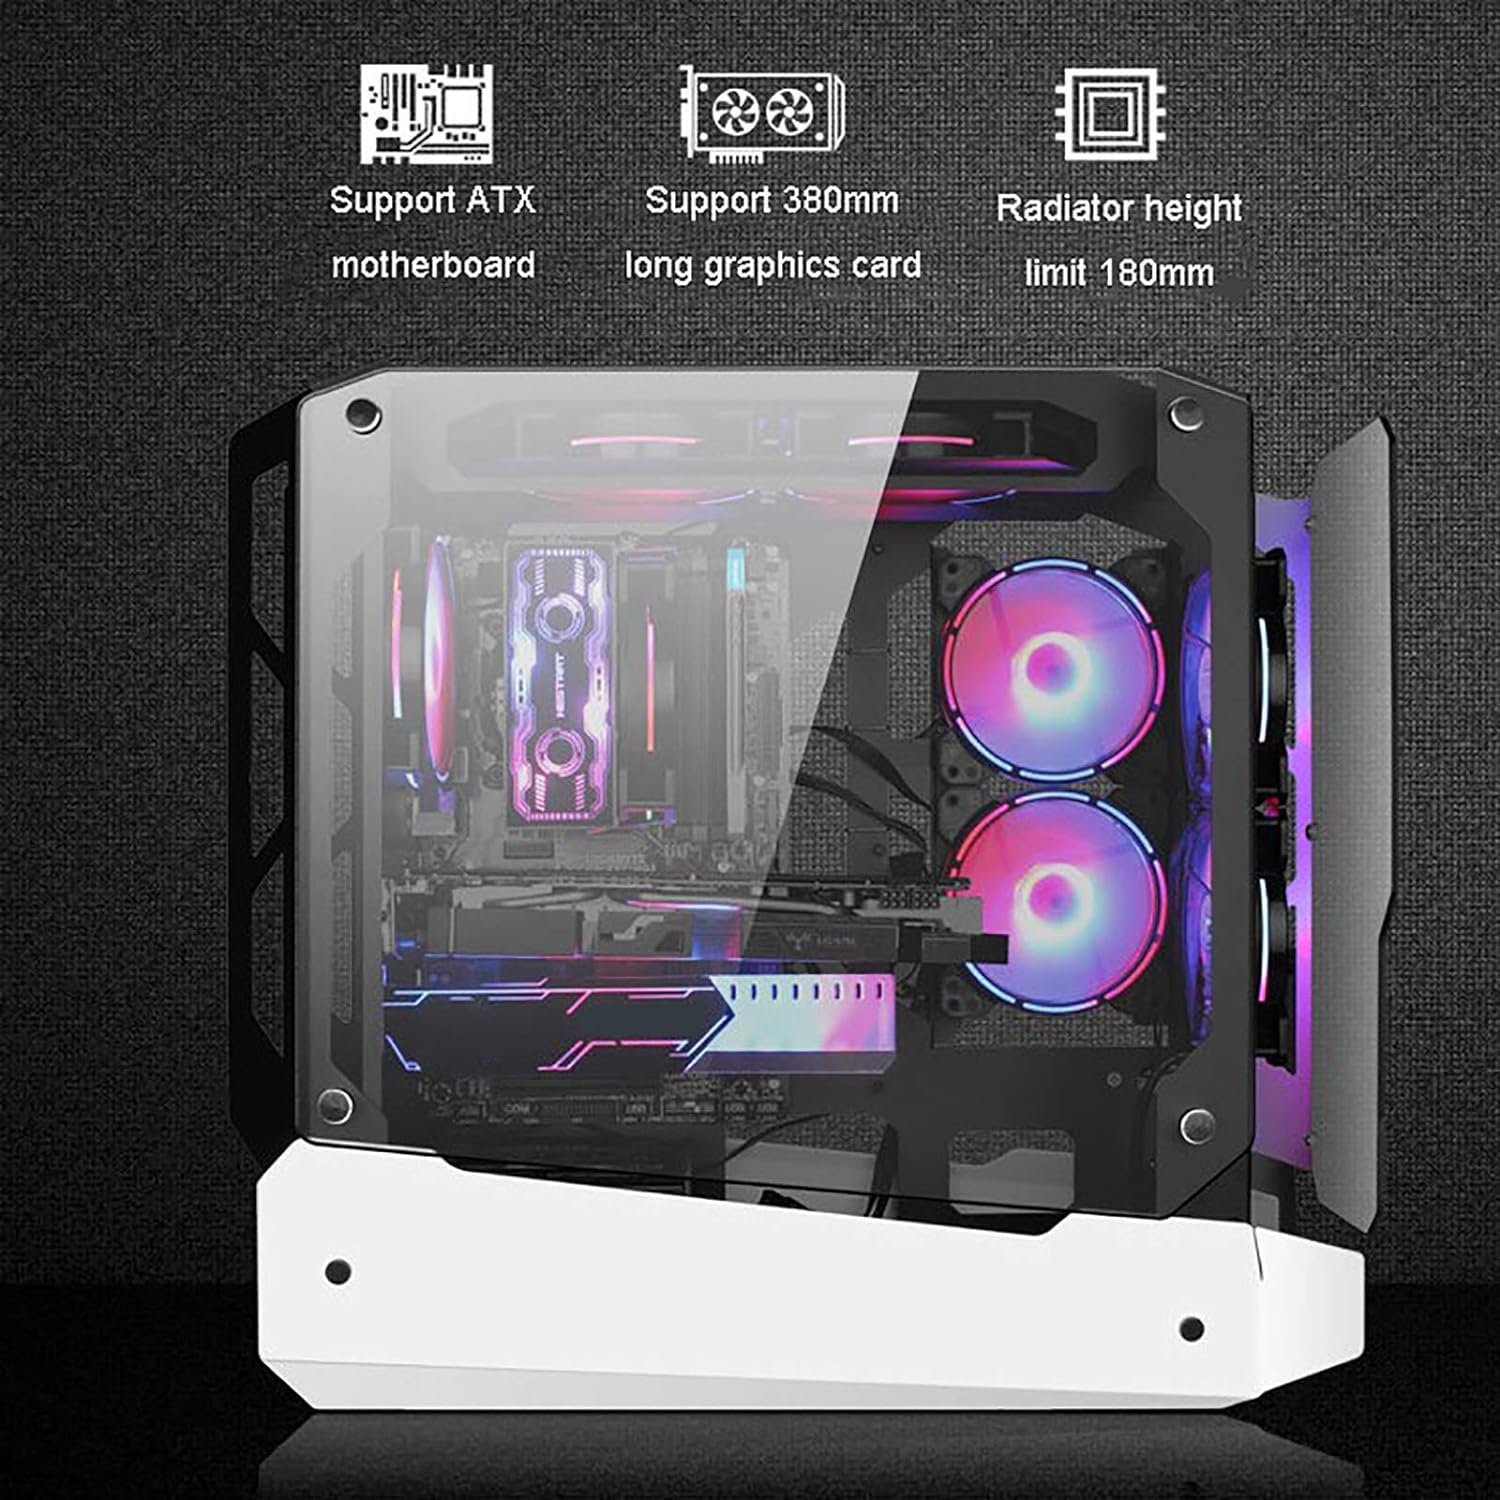 A modern gaming pc with rgb lighting and a transparent side panel comes Intel Core i7-12700K processer equipped with powerful perfomance, Nvidia GeForce RTX 4060 Graphic delivers top-notch performance for immersive gameplay,16GB 3600MHZ RGB Ram ensures smooth  multitasking, while the 1TB Nvme SSD provides ample storage space for your games